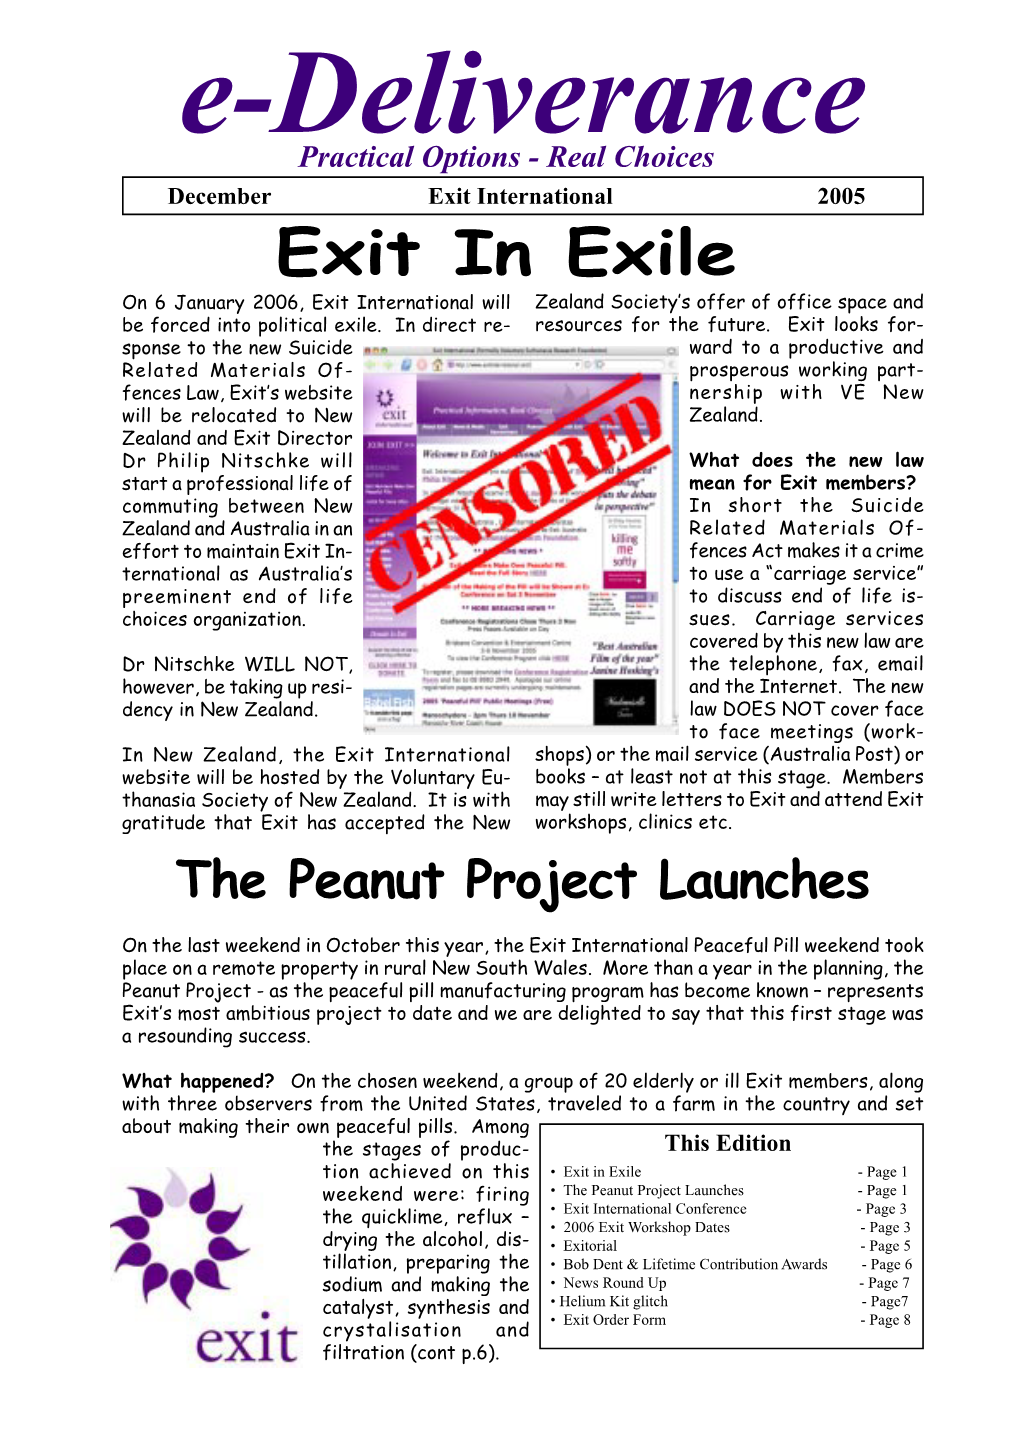 Exit in Exile on 6 January 2006, Exit International Will Zealand Society’S Offer of Office Space and Be Forced Into Political Exile